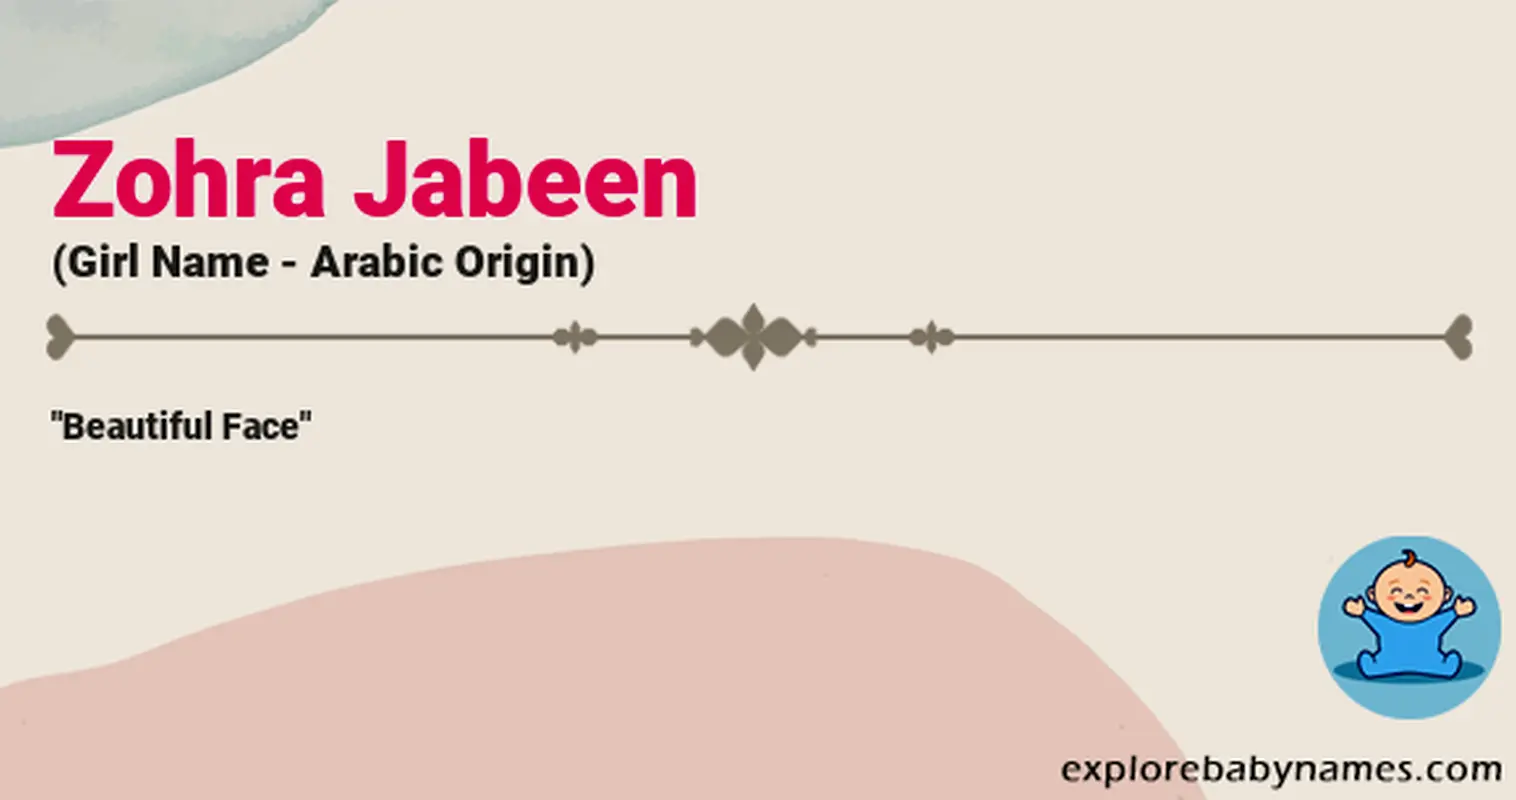 Meaning of Zohra Jabeen